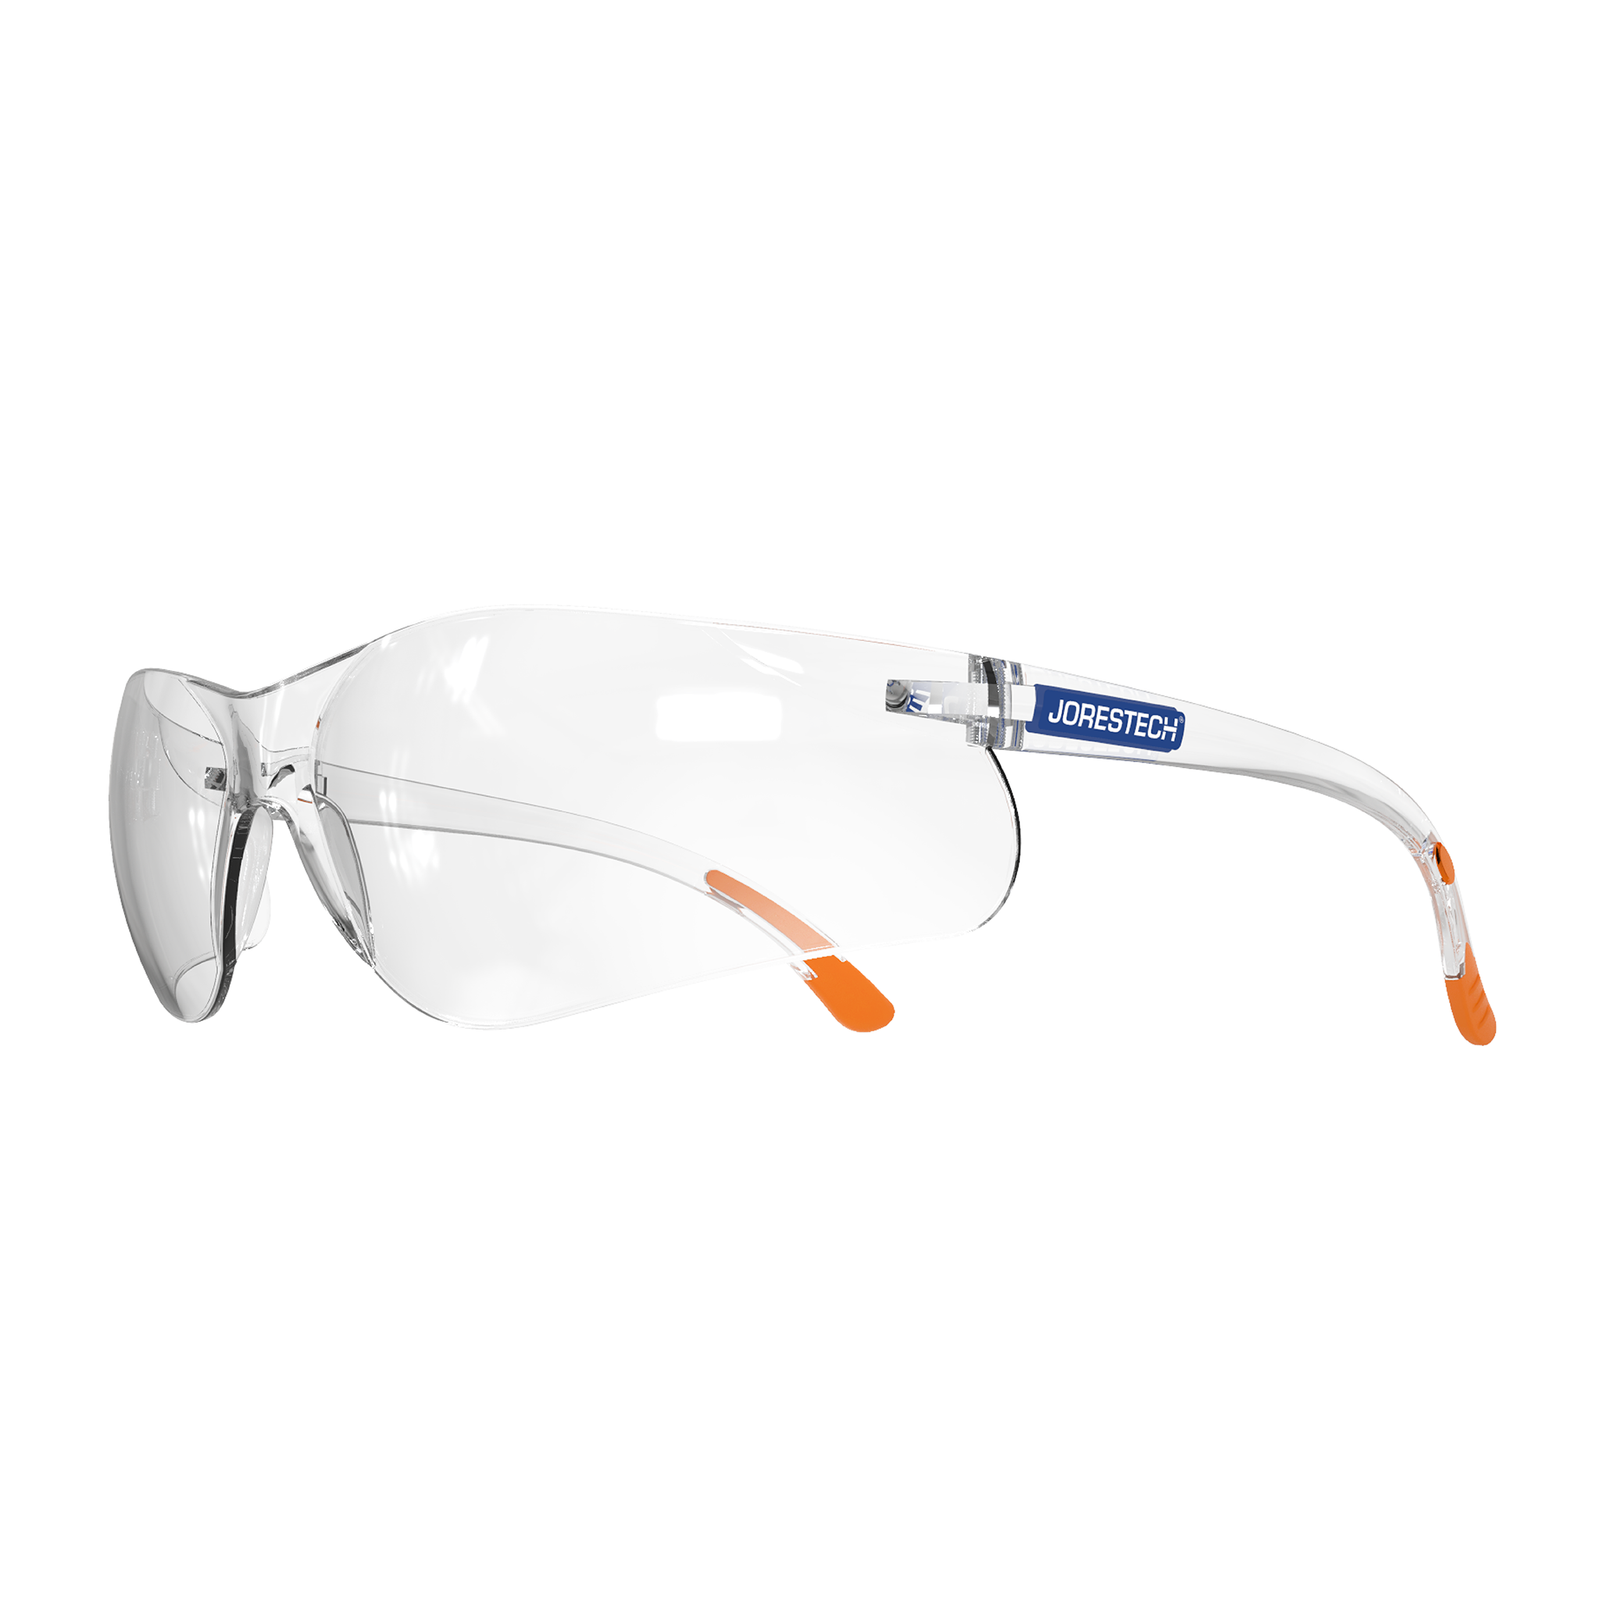 Diagonal view of the clear JORESTECH wraparound ANSI Z87+ compliant safety glasses for high impact protection with orange rubberized temple tips. 